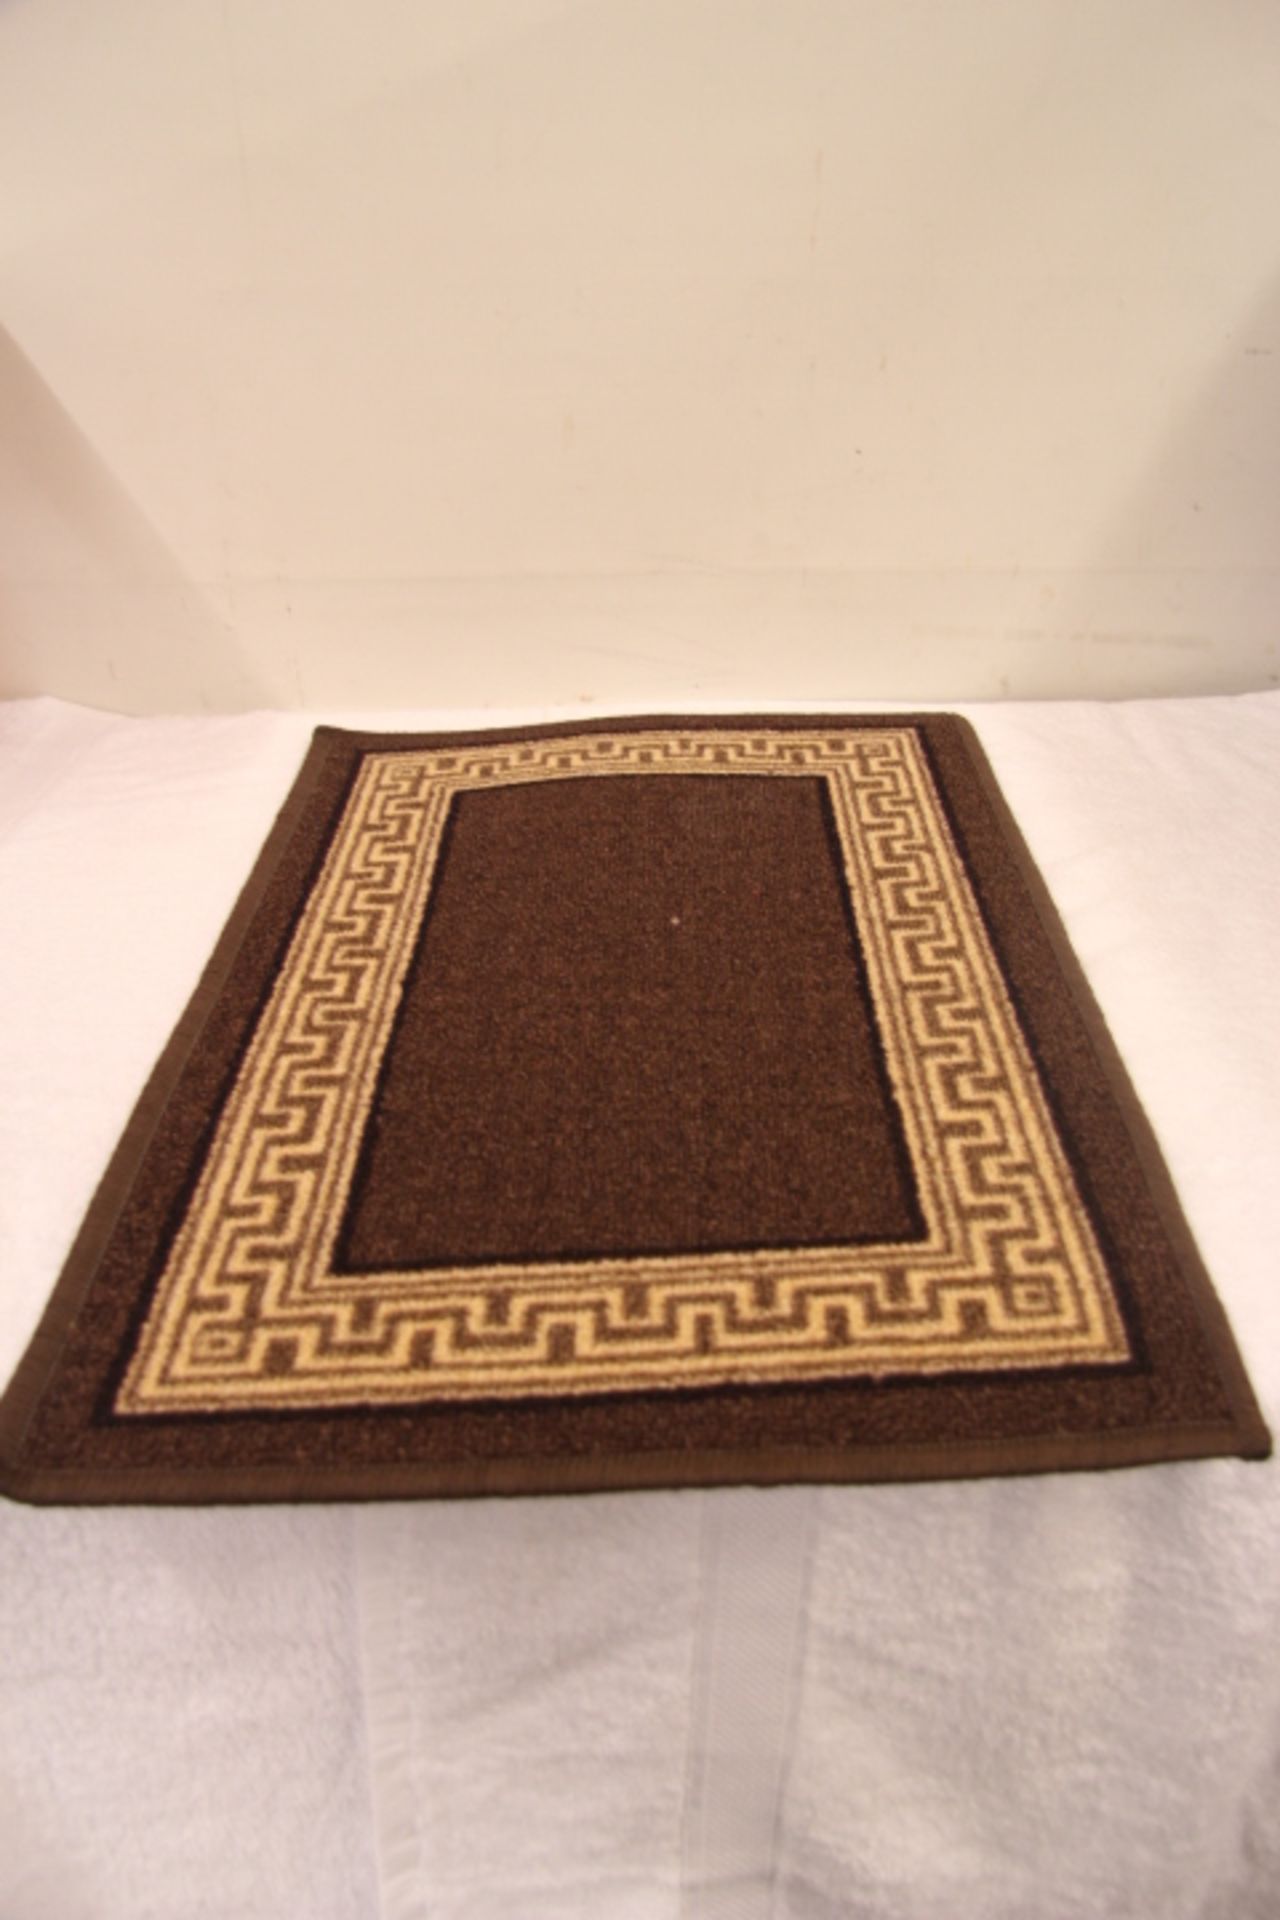 V *TRADE QTY* Brand New 40 X 60cm Brown Decorative Door Mat X 4 YOUR BID PRICE TO BE MULTIPLIED BY